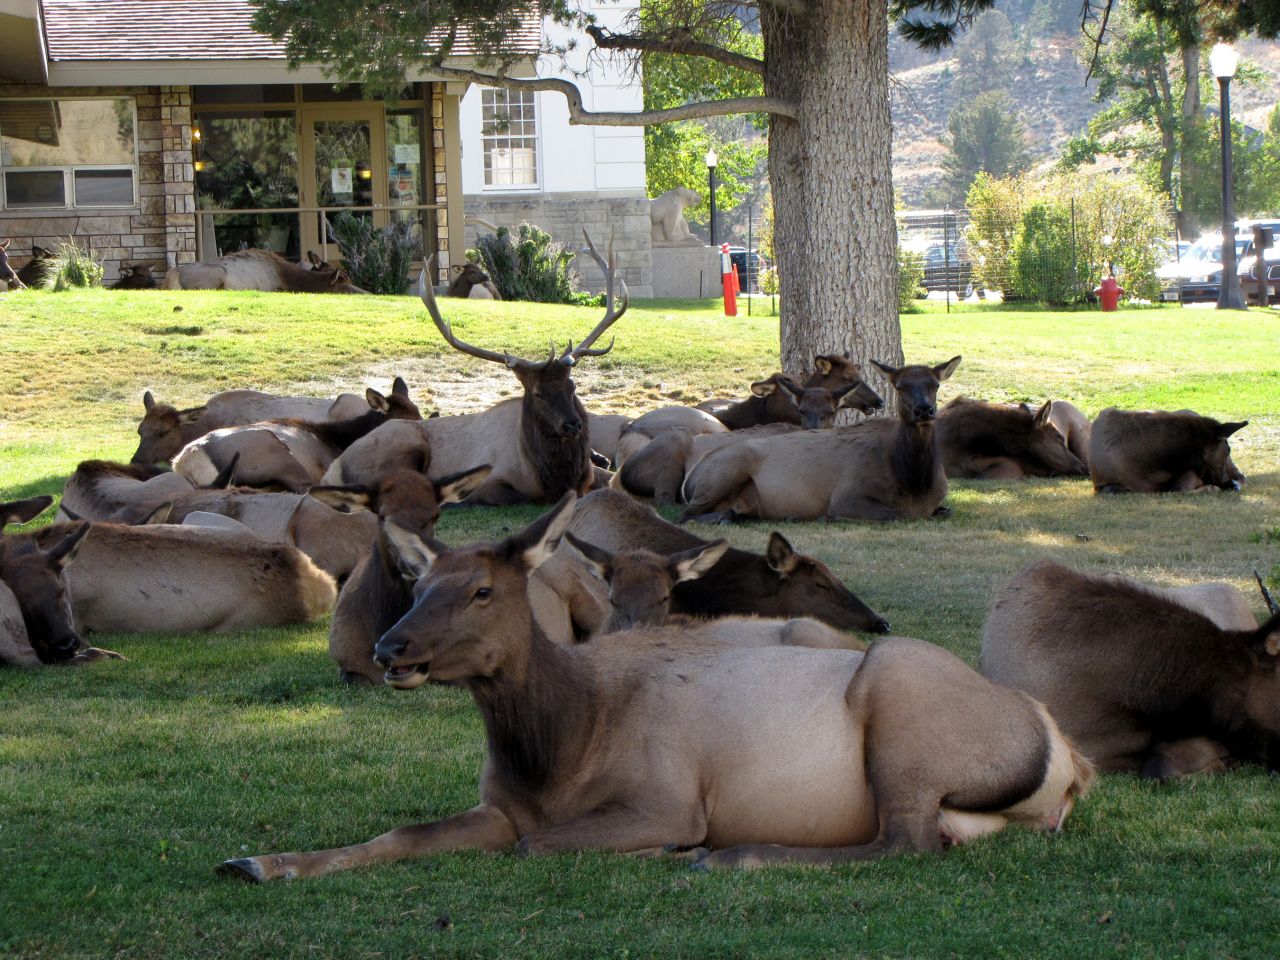 In elk mating season, which starts around September, the bulls come down from the mountains and gather up as many cows (female elk) as they can into harems. Shown here is a harem of 27 cows resting in Mammoth Hot Springs near the town post office. Visitors are cautioned to stay at least 25 yards away from the elk, which have been known to ram cars and trap people. 